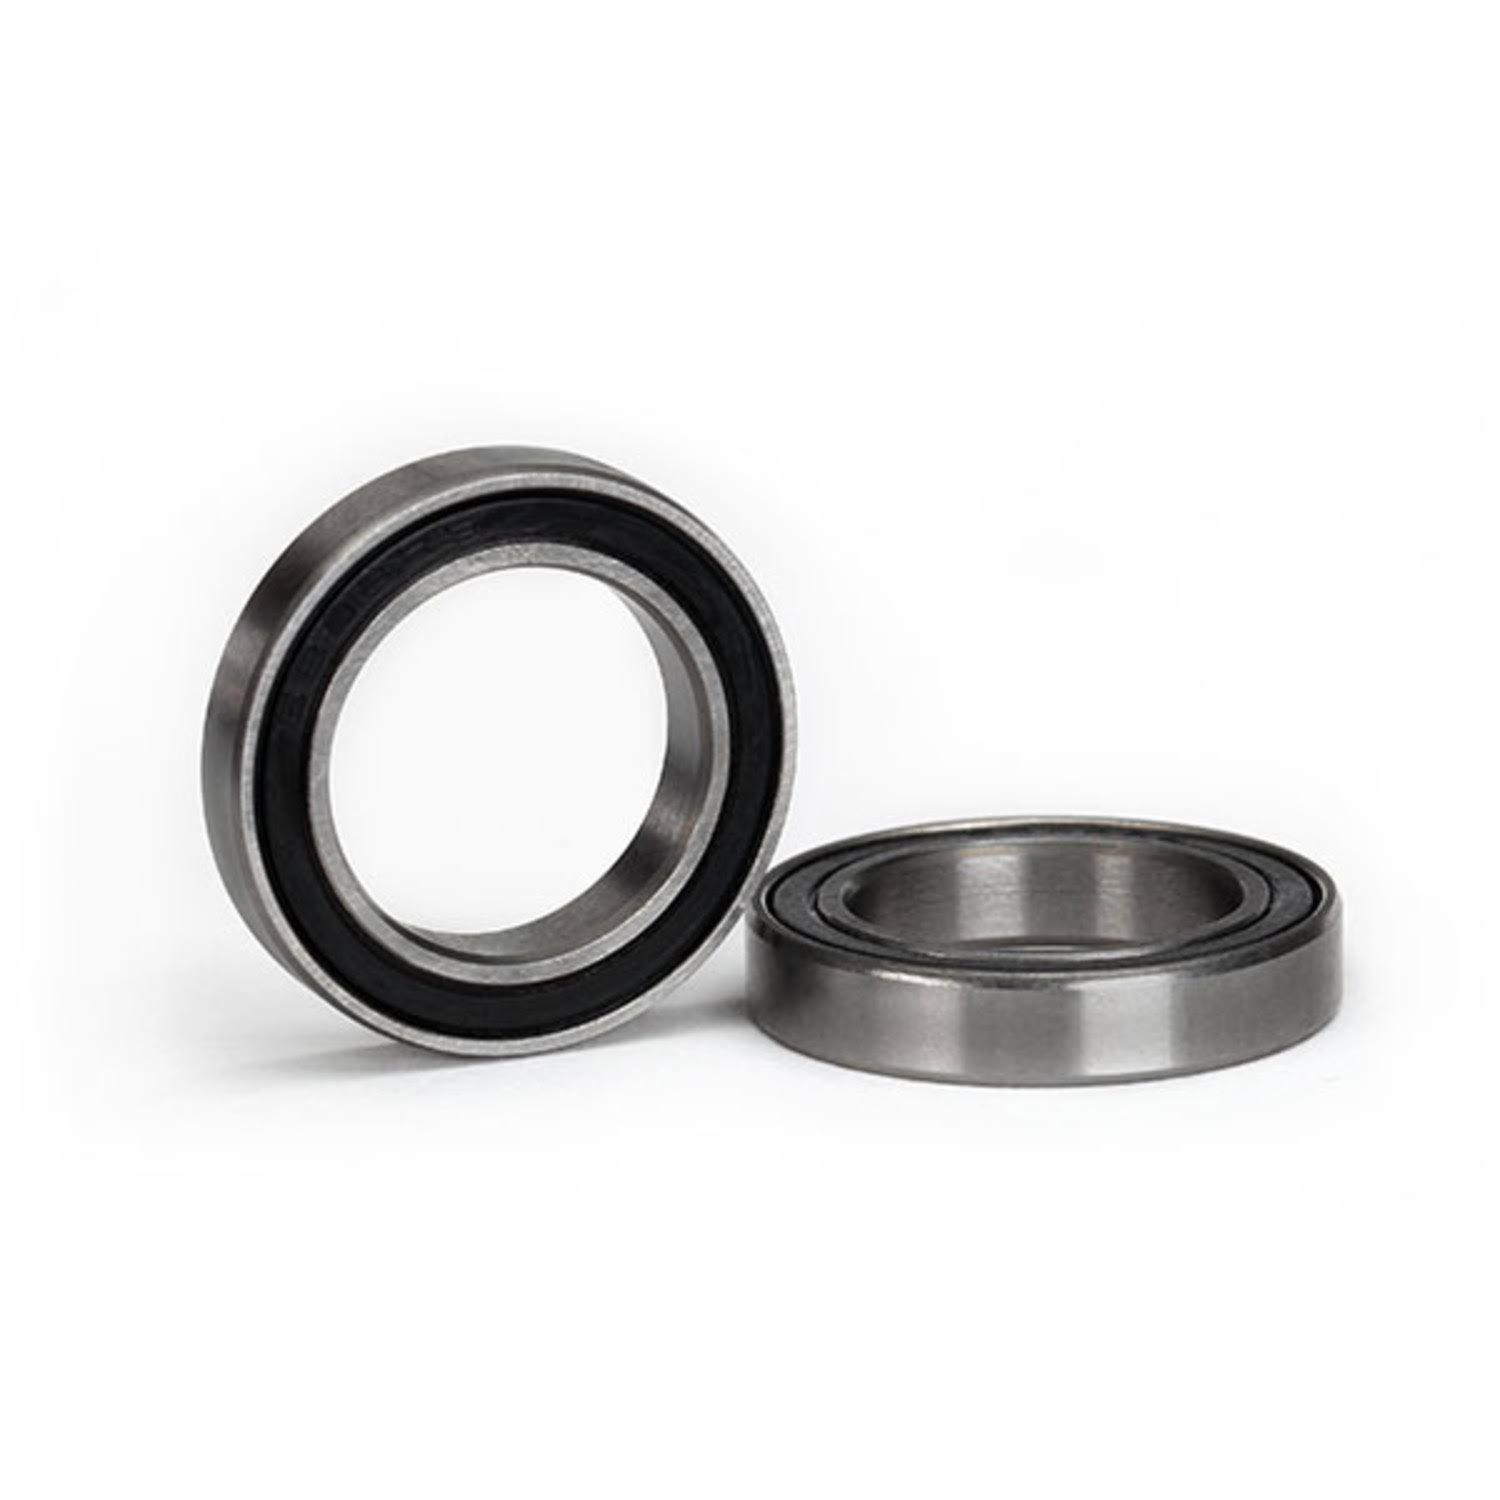 Traxxas TRA5106A Black Rubber Sealed RC Vehicle Ball Bearing